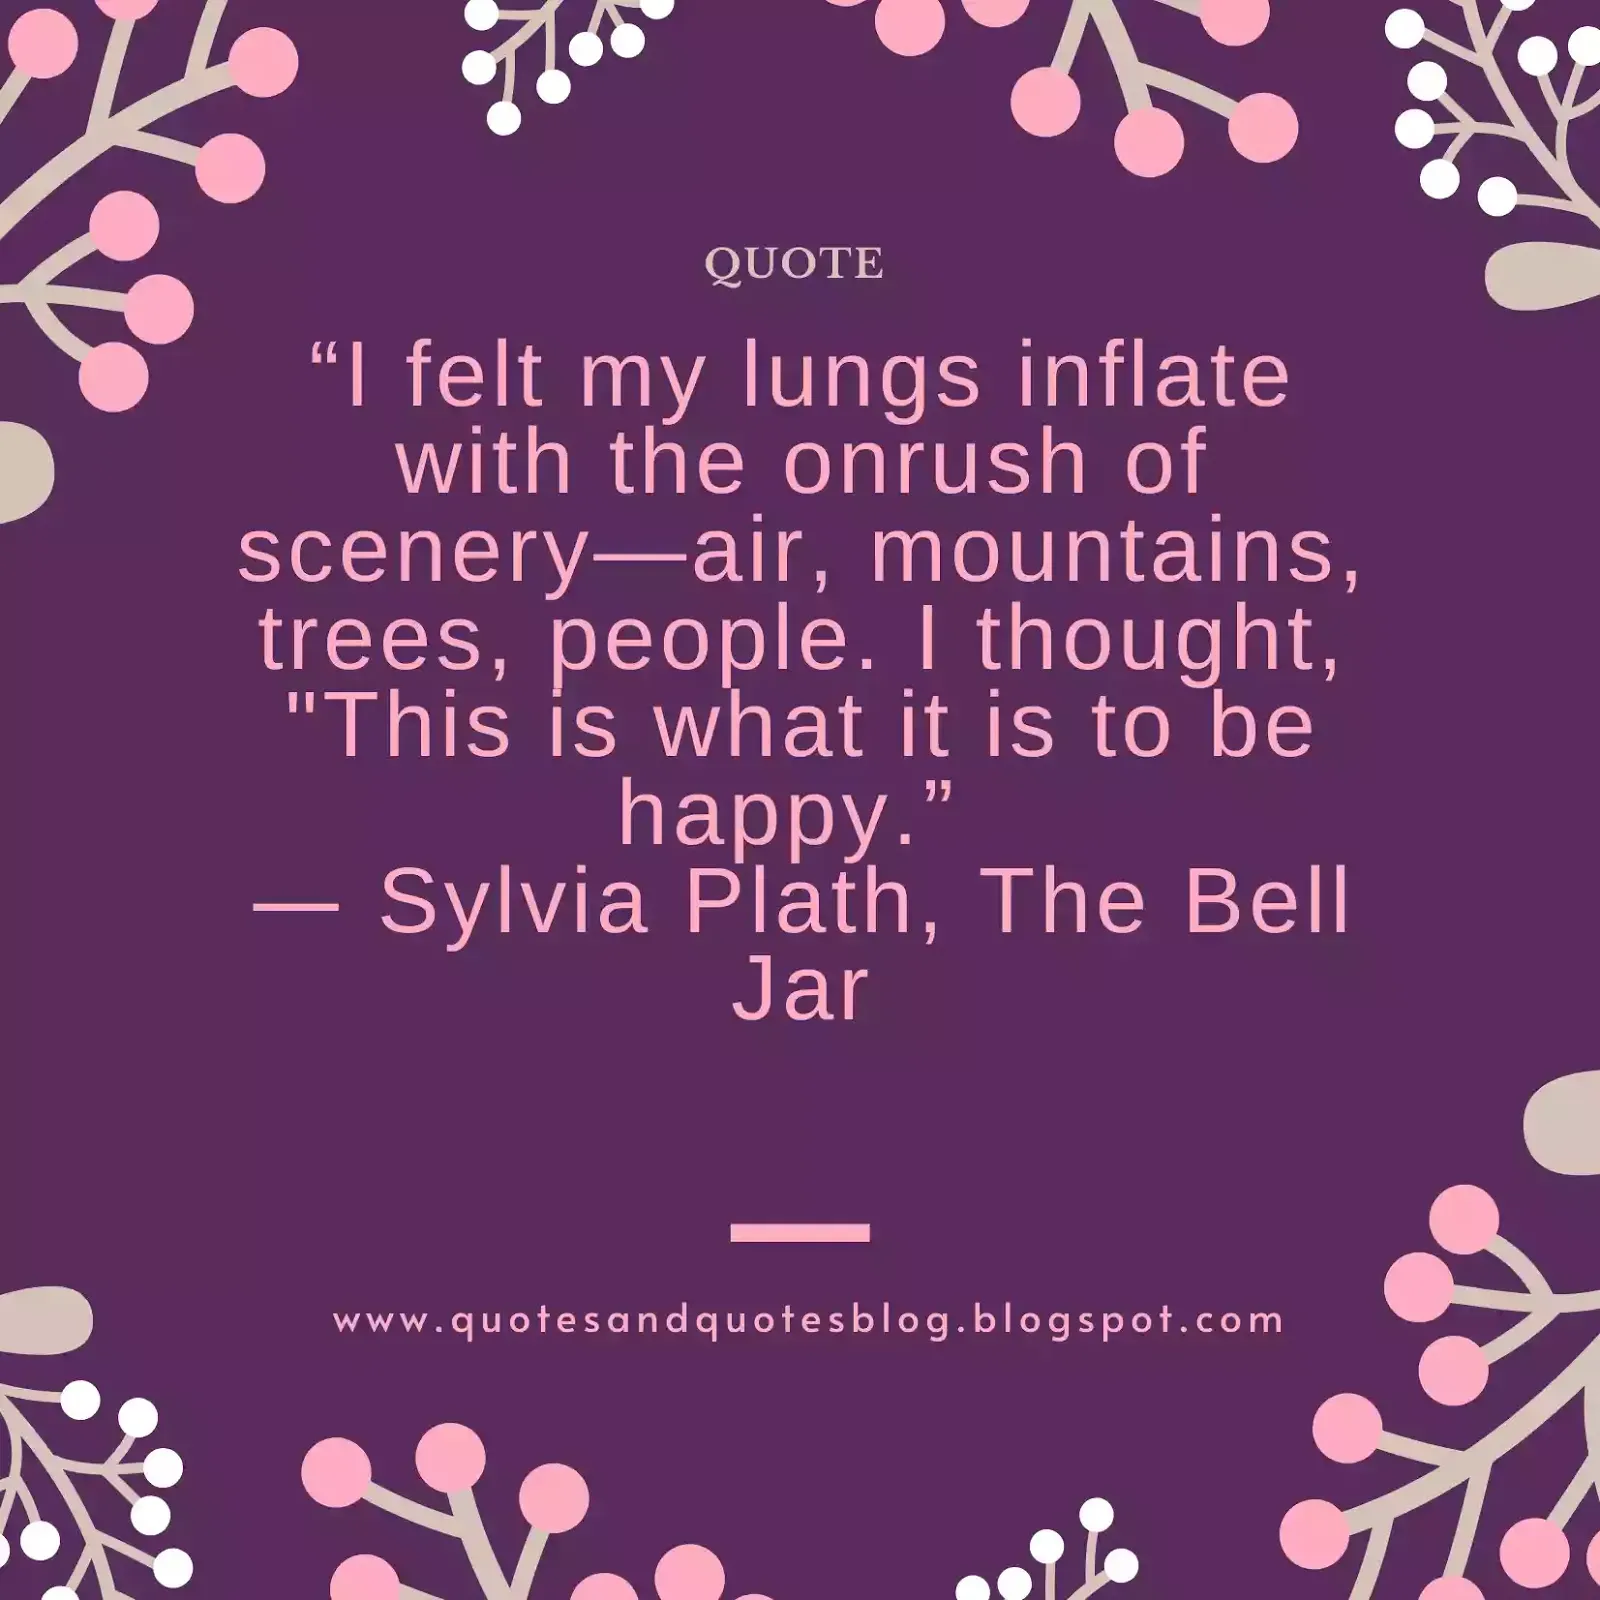 <img src=”happiness quotes.jpg” alt=”happiness quote by sylvia plath”>